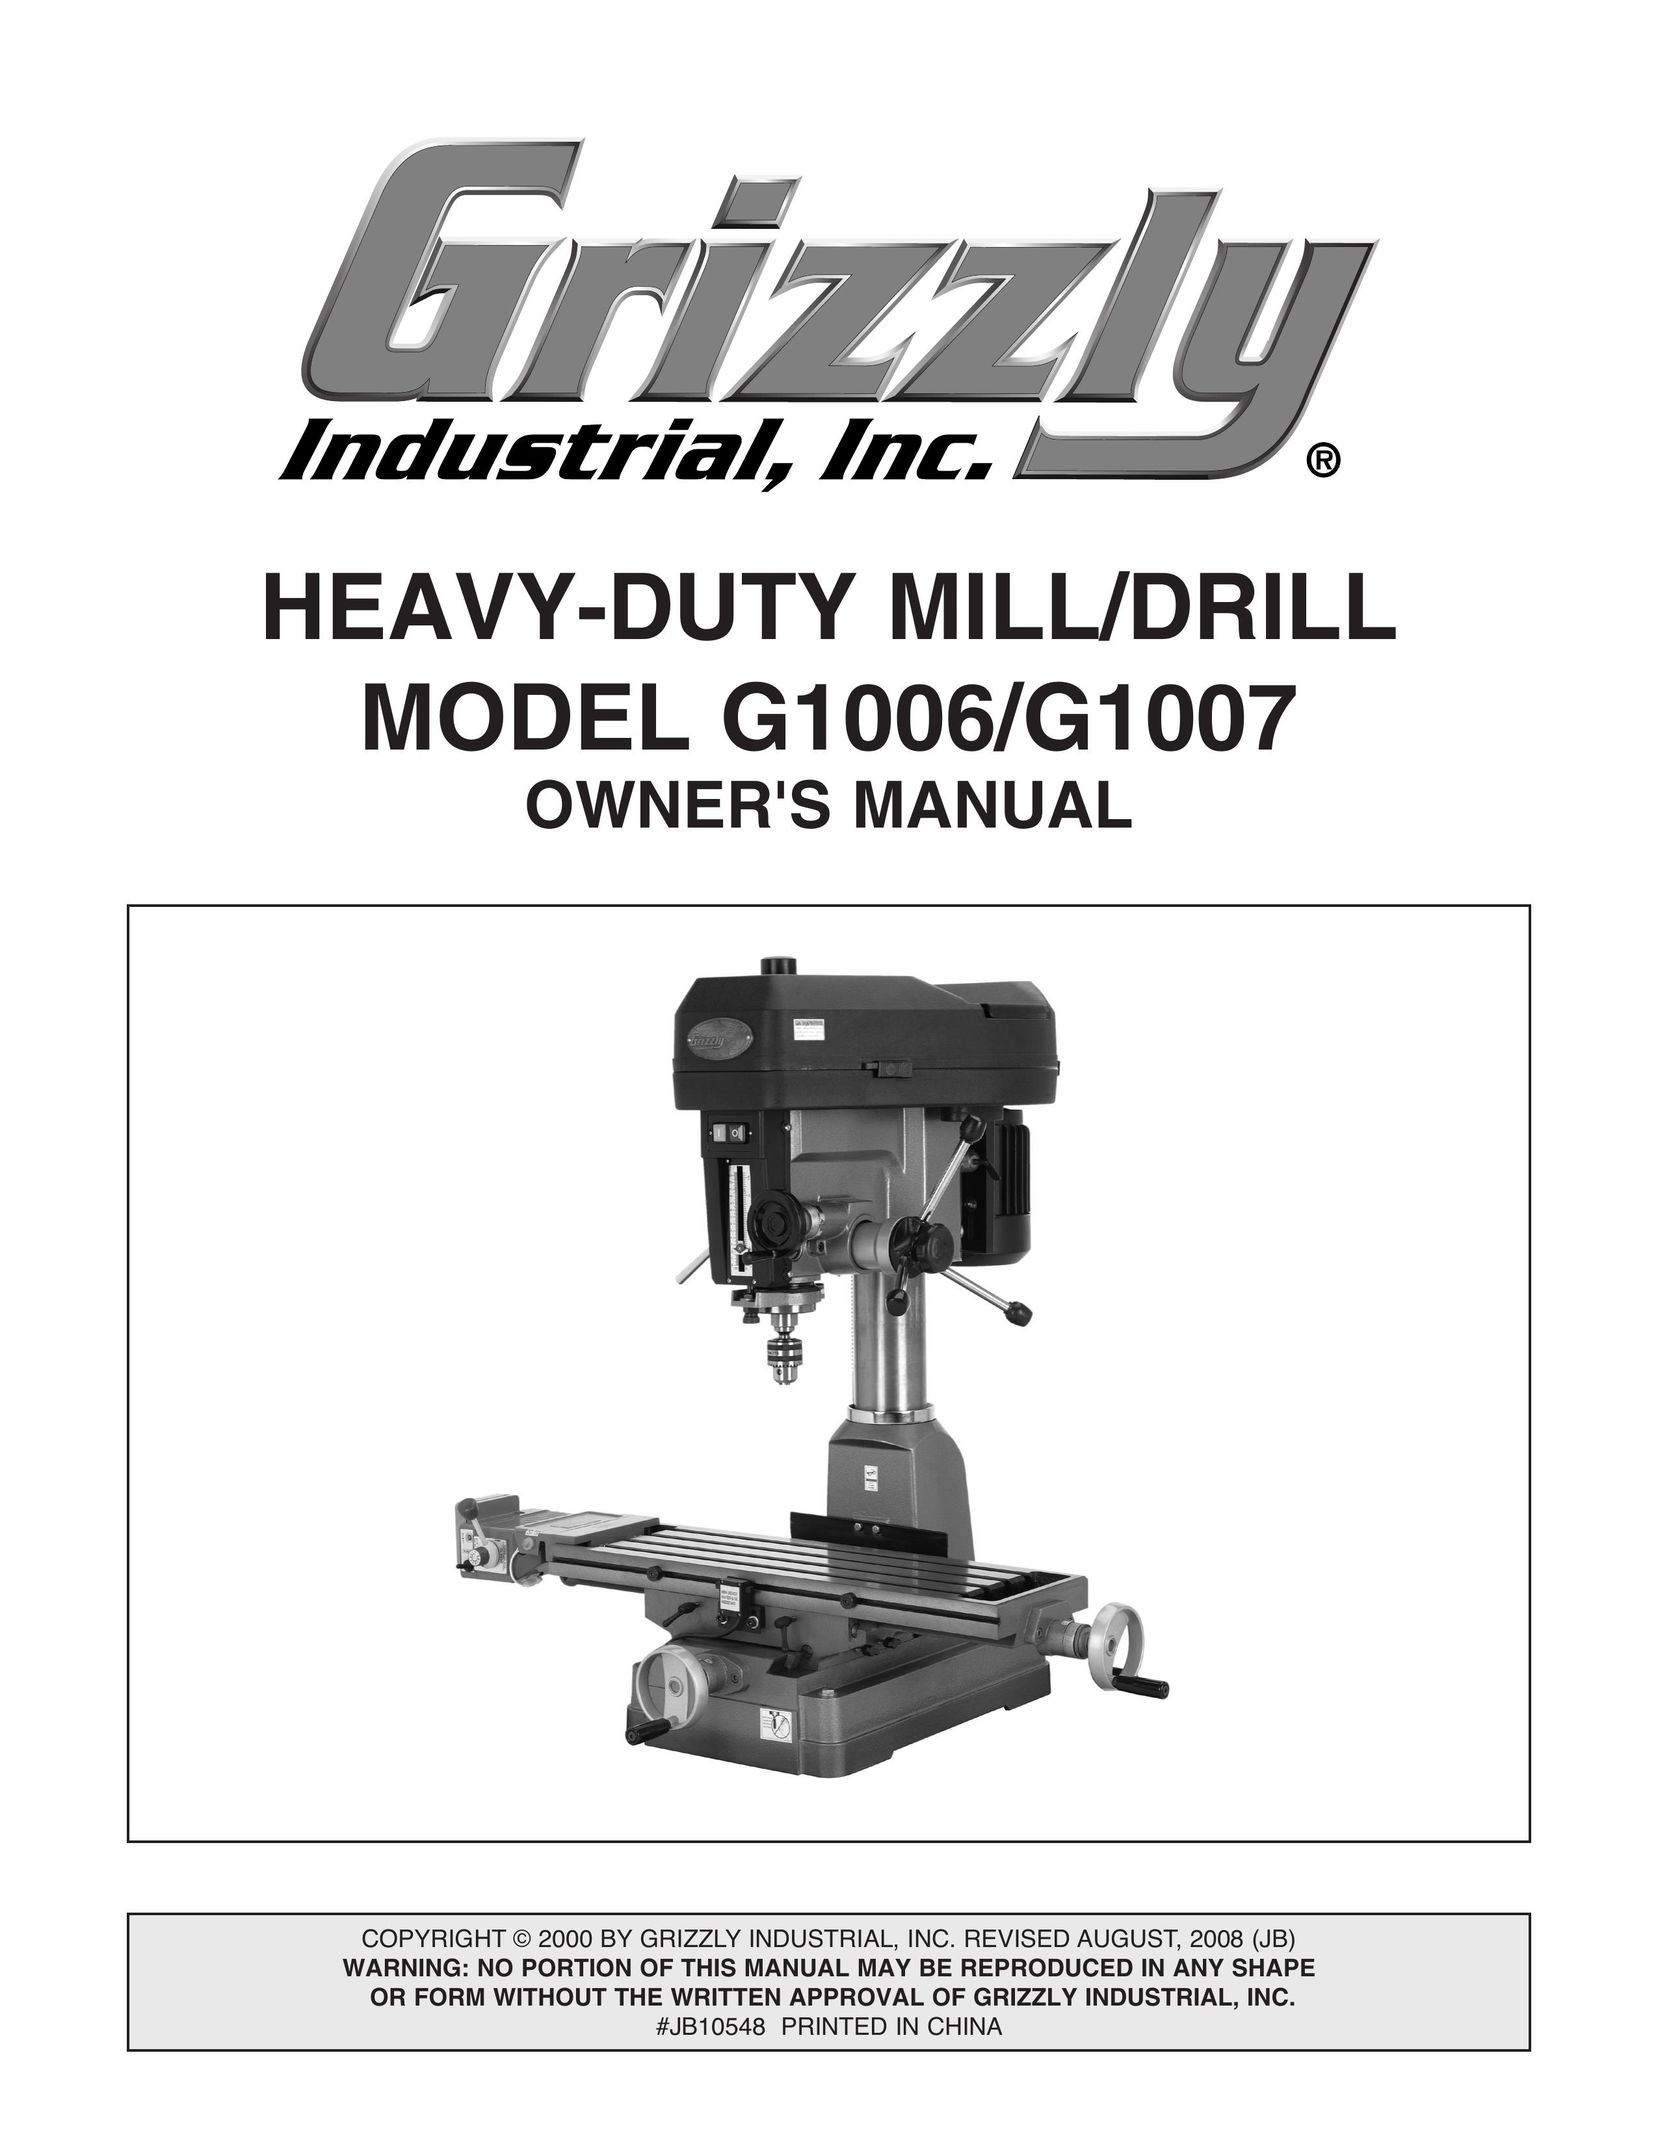 Grizzly G1007 Drill User Manual